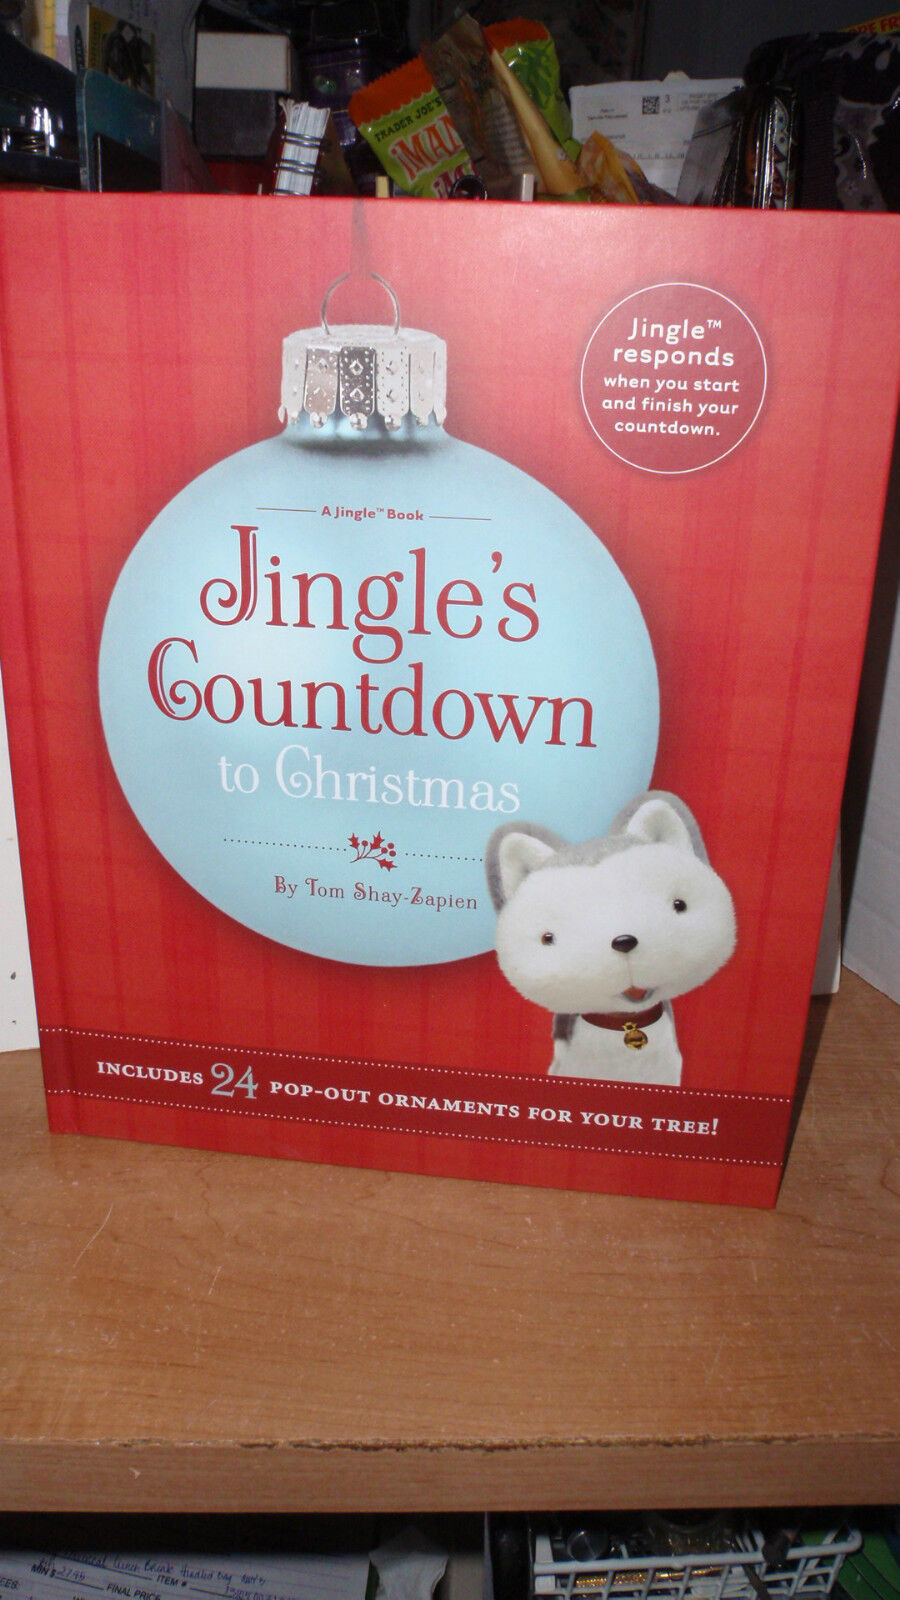 2011 HALLMARK BOOK ~ JINGLE'S COUNTDOWN TO CHRISTMAS & 24 POP OUT ORNAMENTS NWT